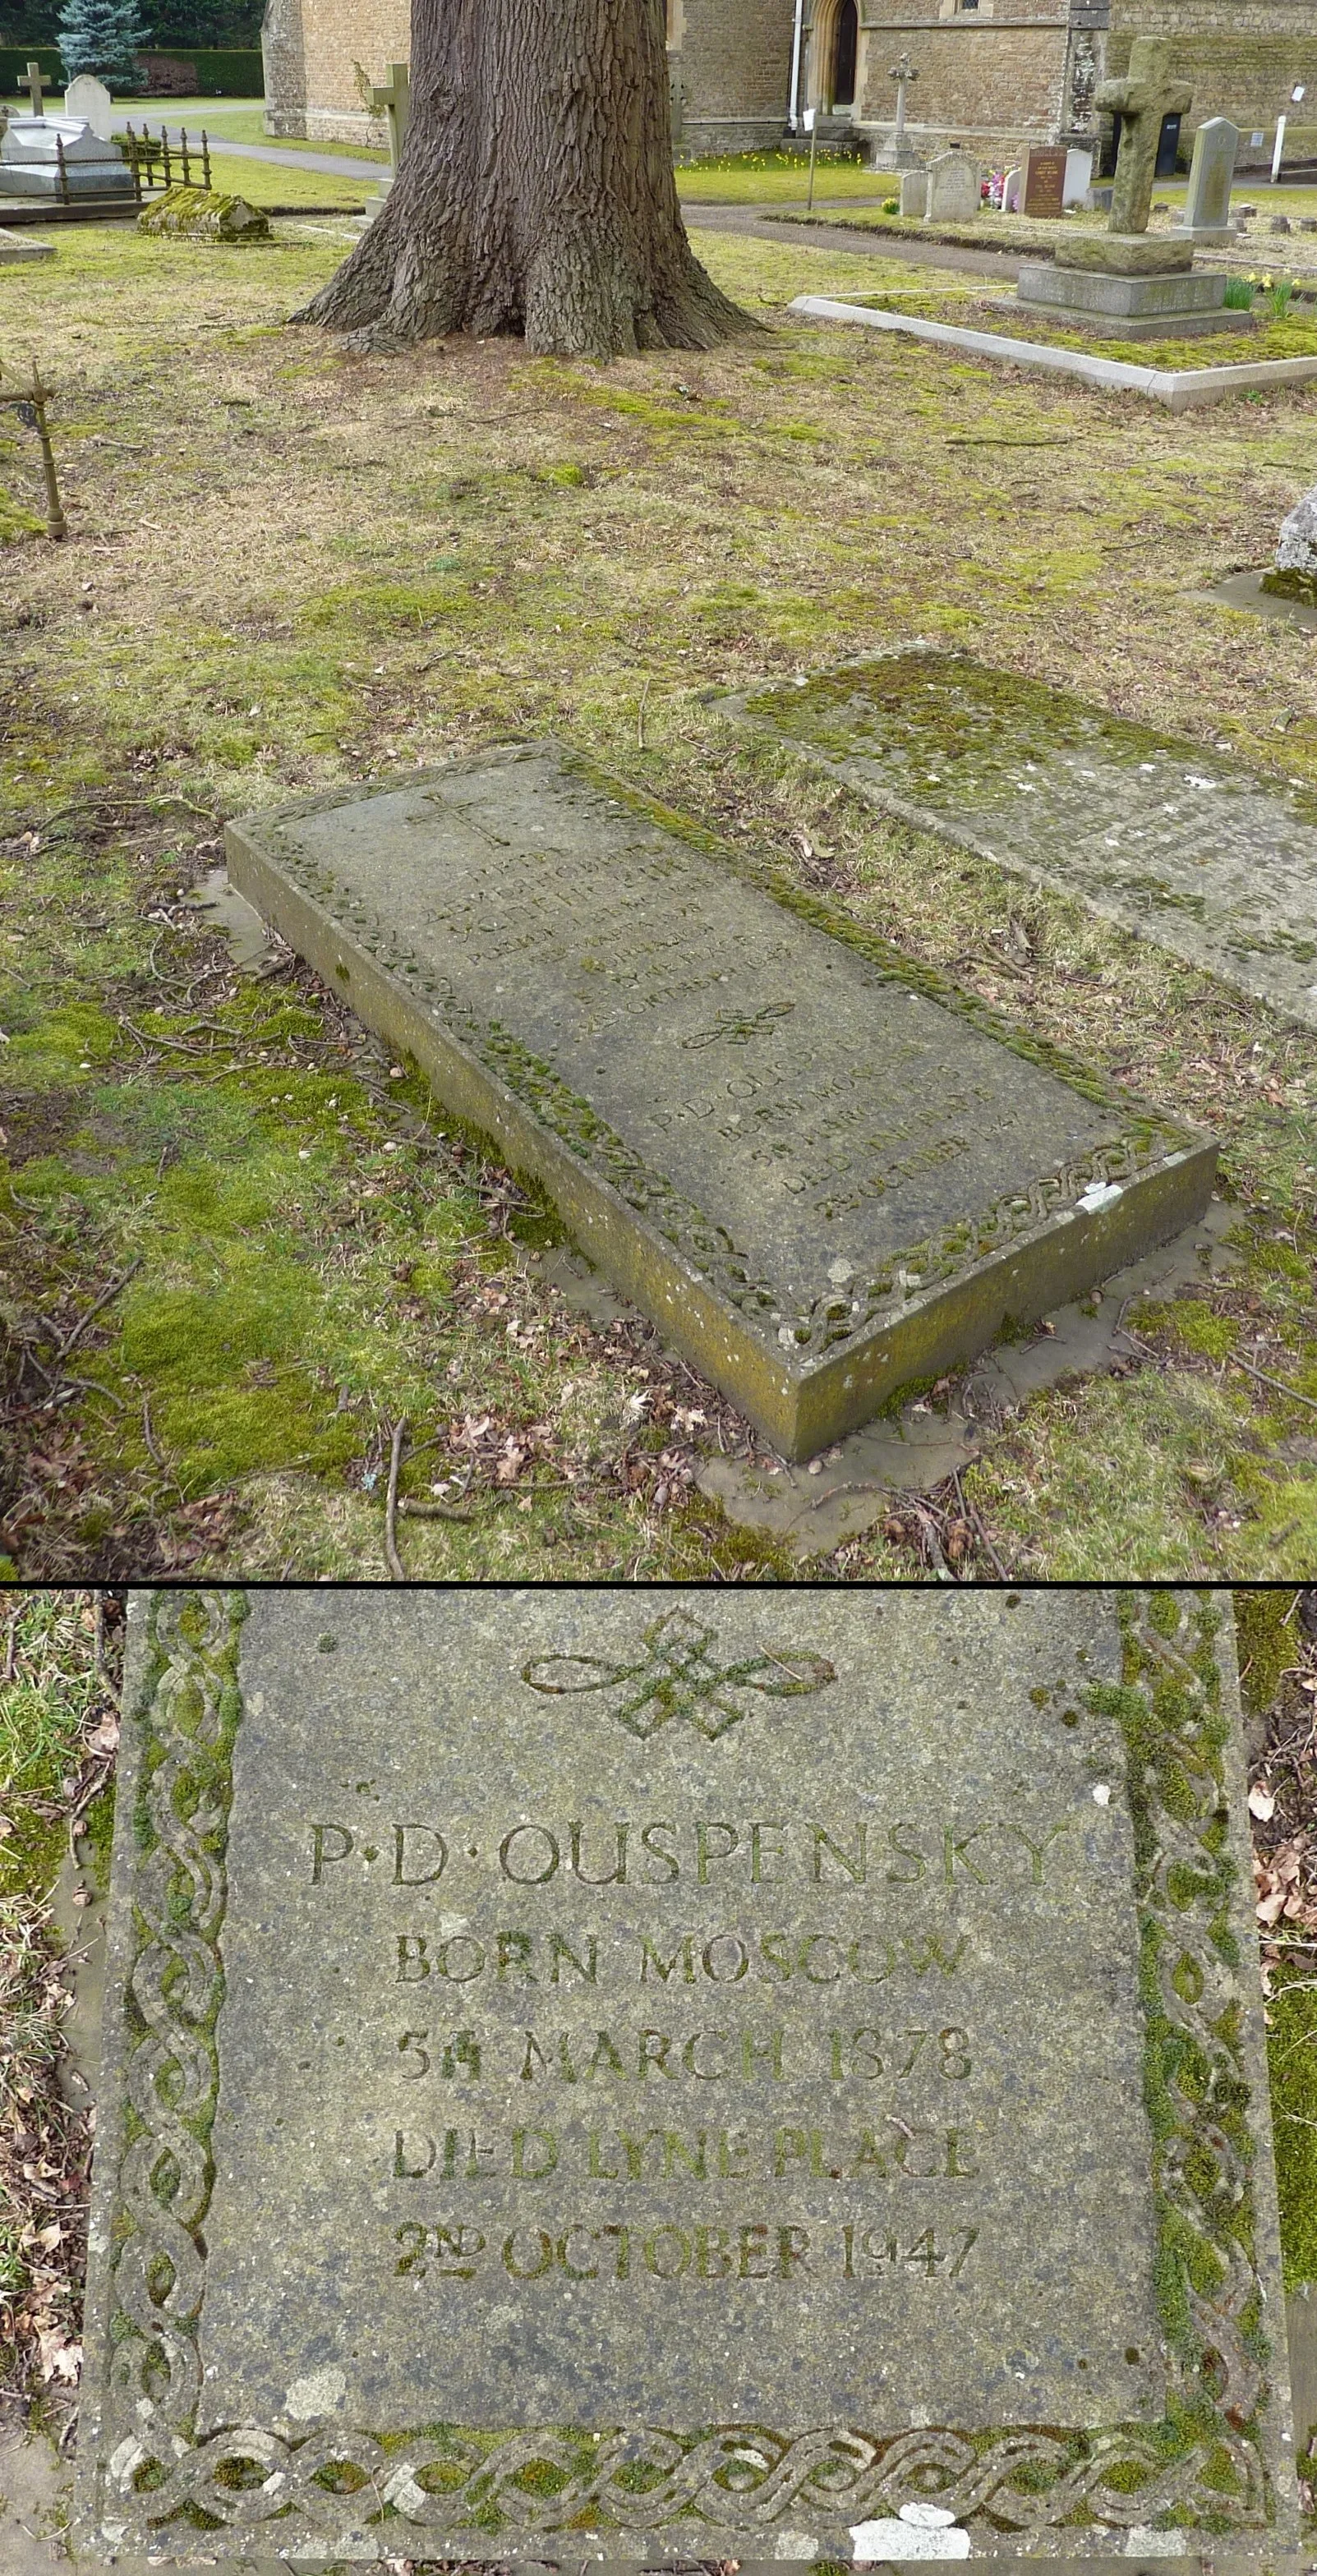 Photo showing: The grave of Russian esotericist P. D. Ouspensky at the Holy Trinity Church in Lyne, Surrey, England.